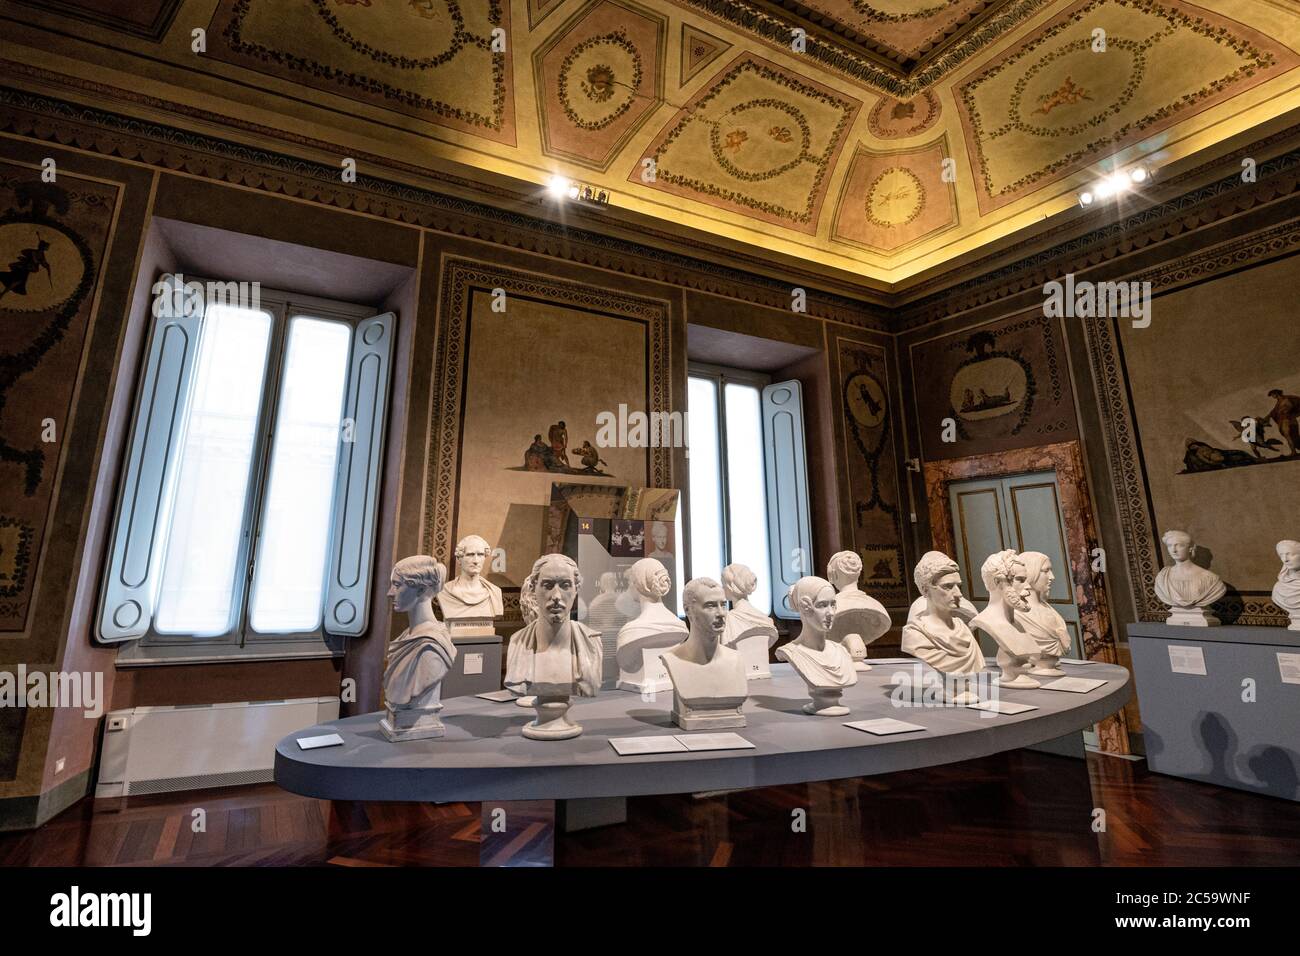 Gallery of busts of personalities of the time carved in plaster by Pietro Tenerani, in the 2th floor of Palazzo Braschi in Rome Stock Photo